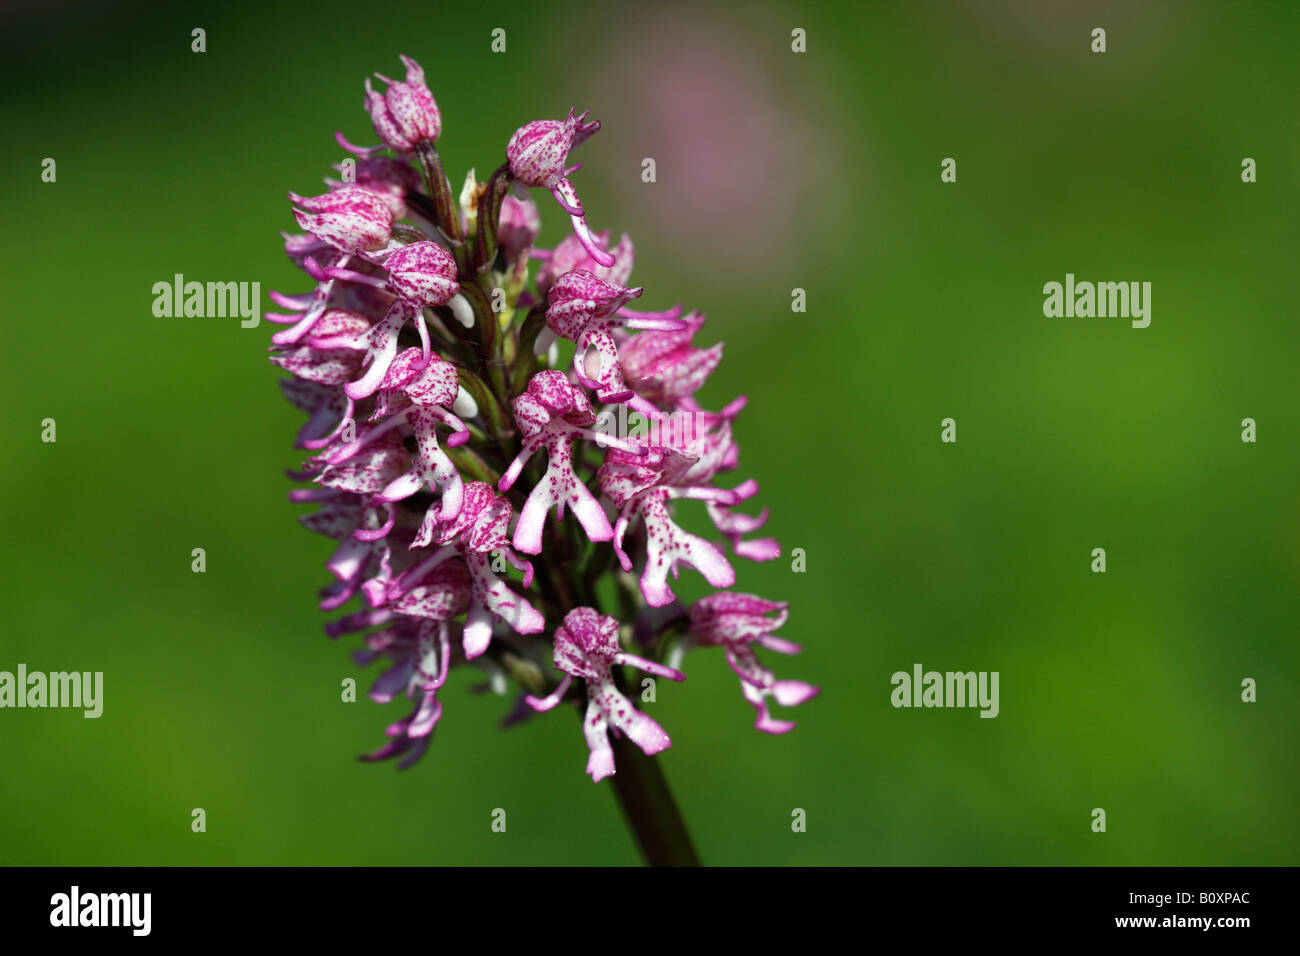 Rare Lady x Monkey Orchid Hybrid [Orchis purpurea x simia], wild flower growing in field, 'close up' detail, England, UK Stock Photo